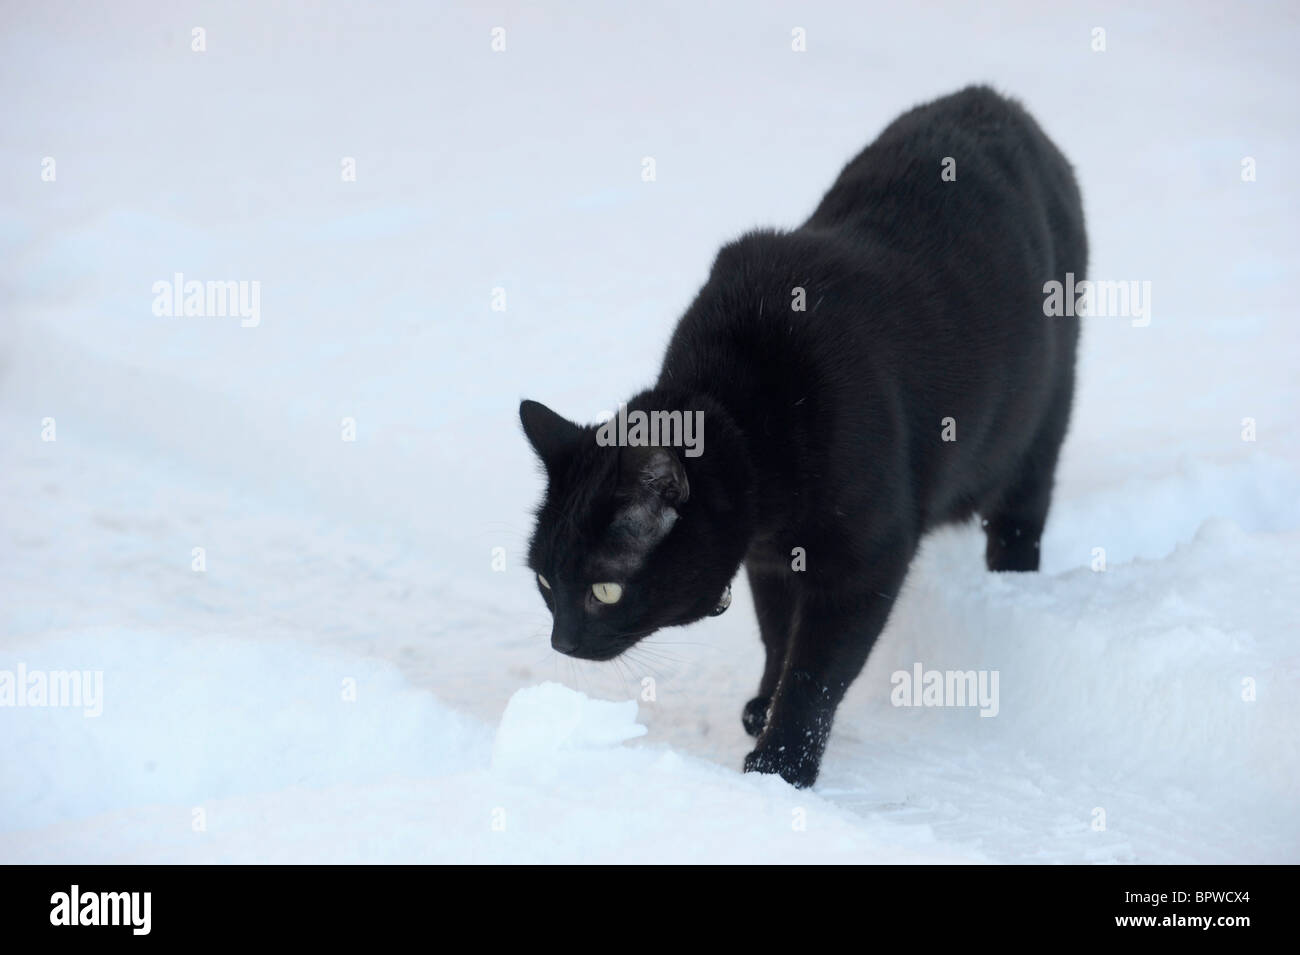 Hector the cat gets cold paws as he ventures out into the snow Stock Photo